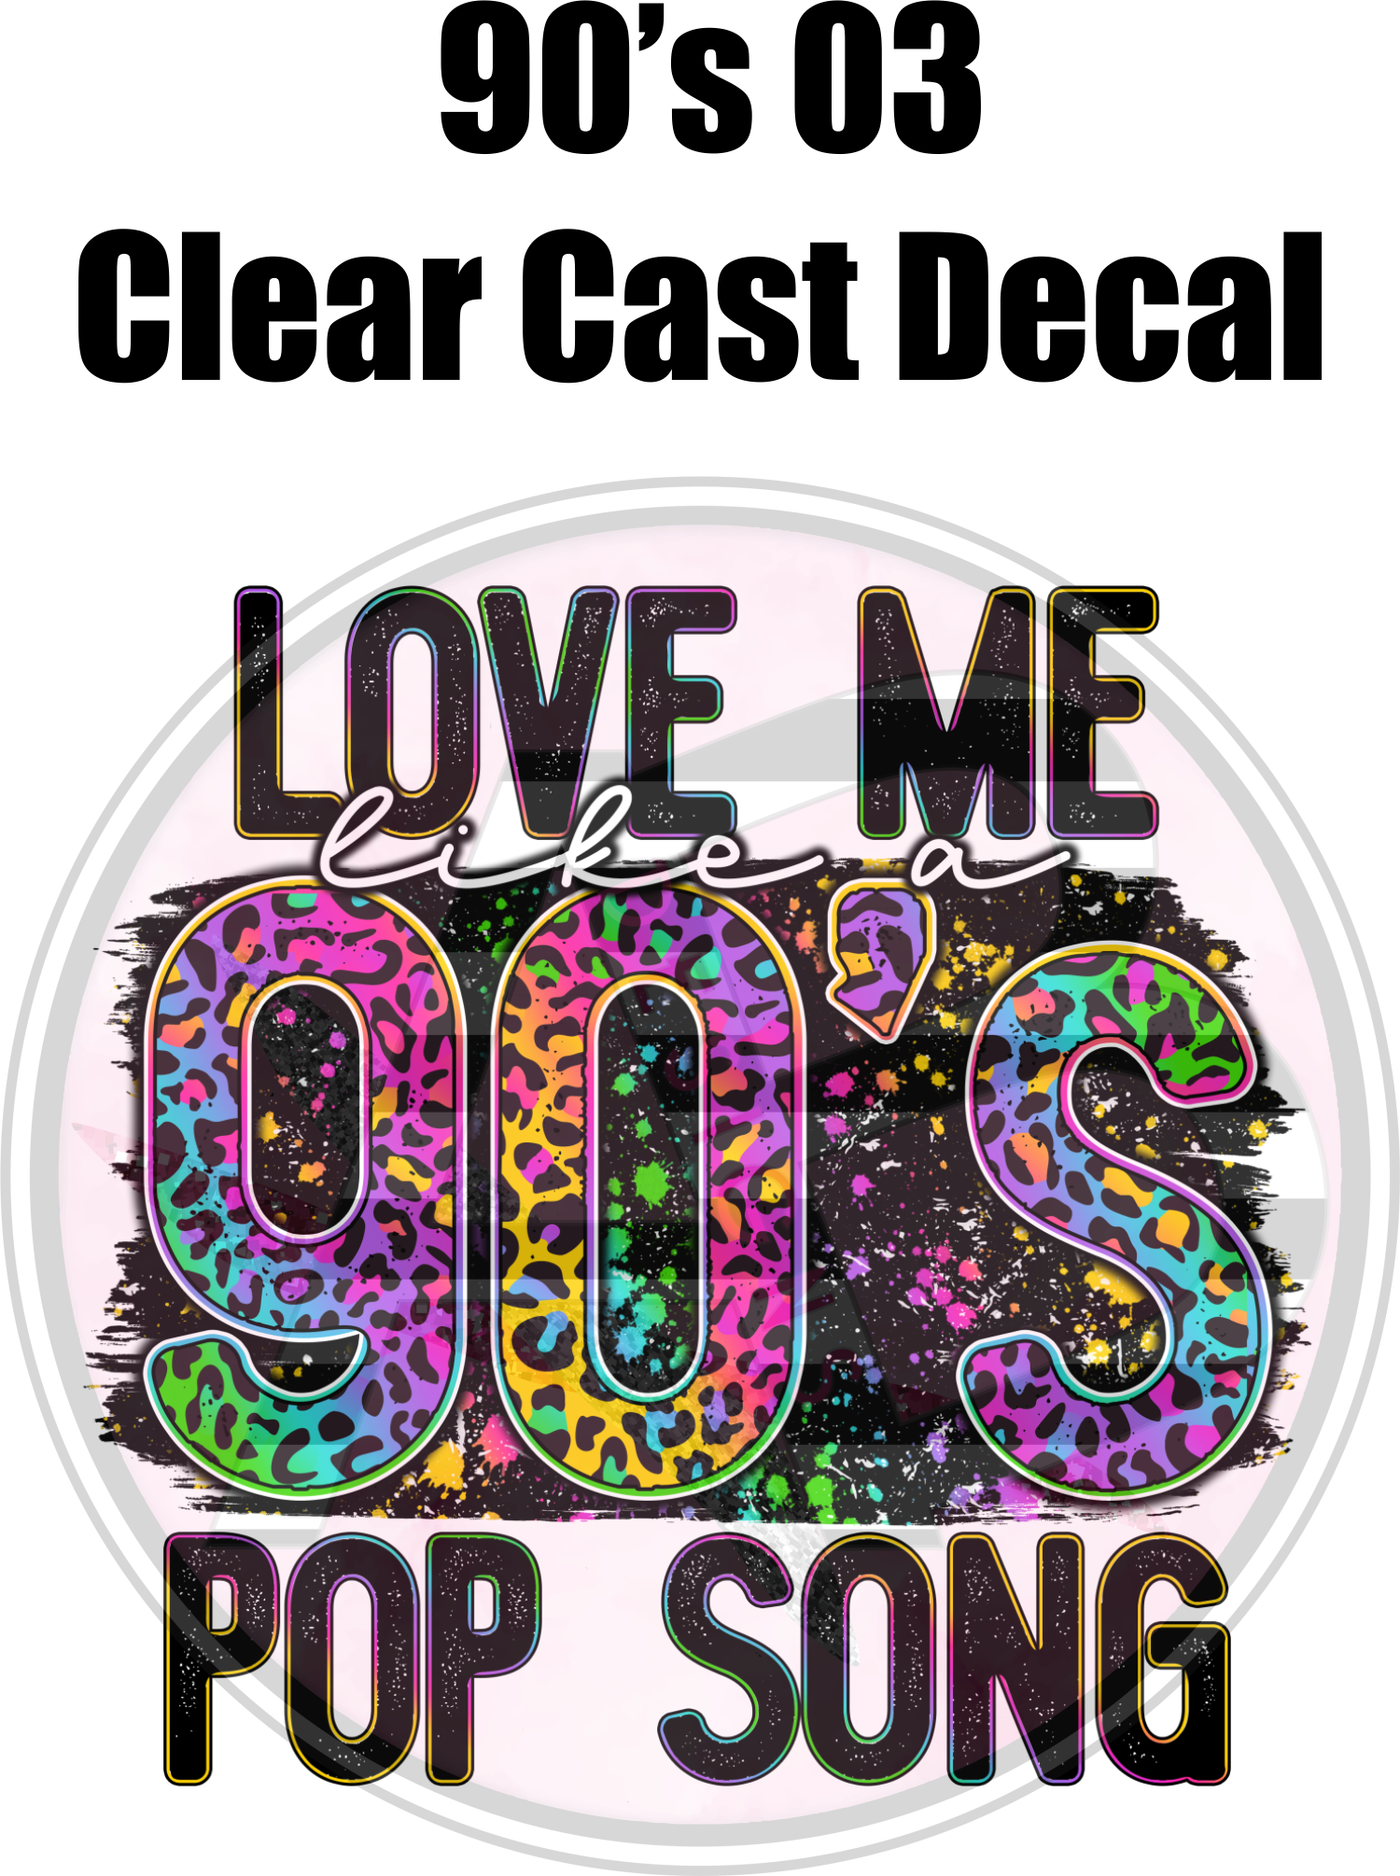 90's 03 - Clear Cast Decal